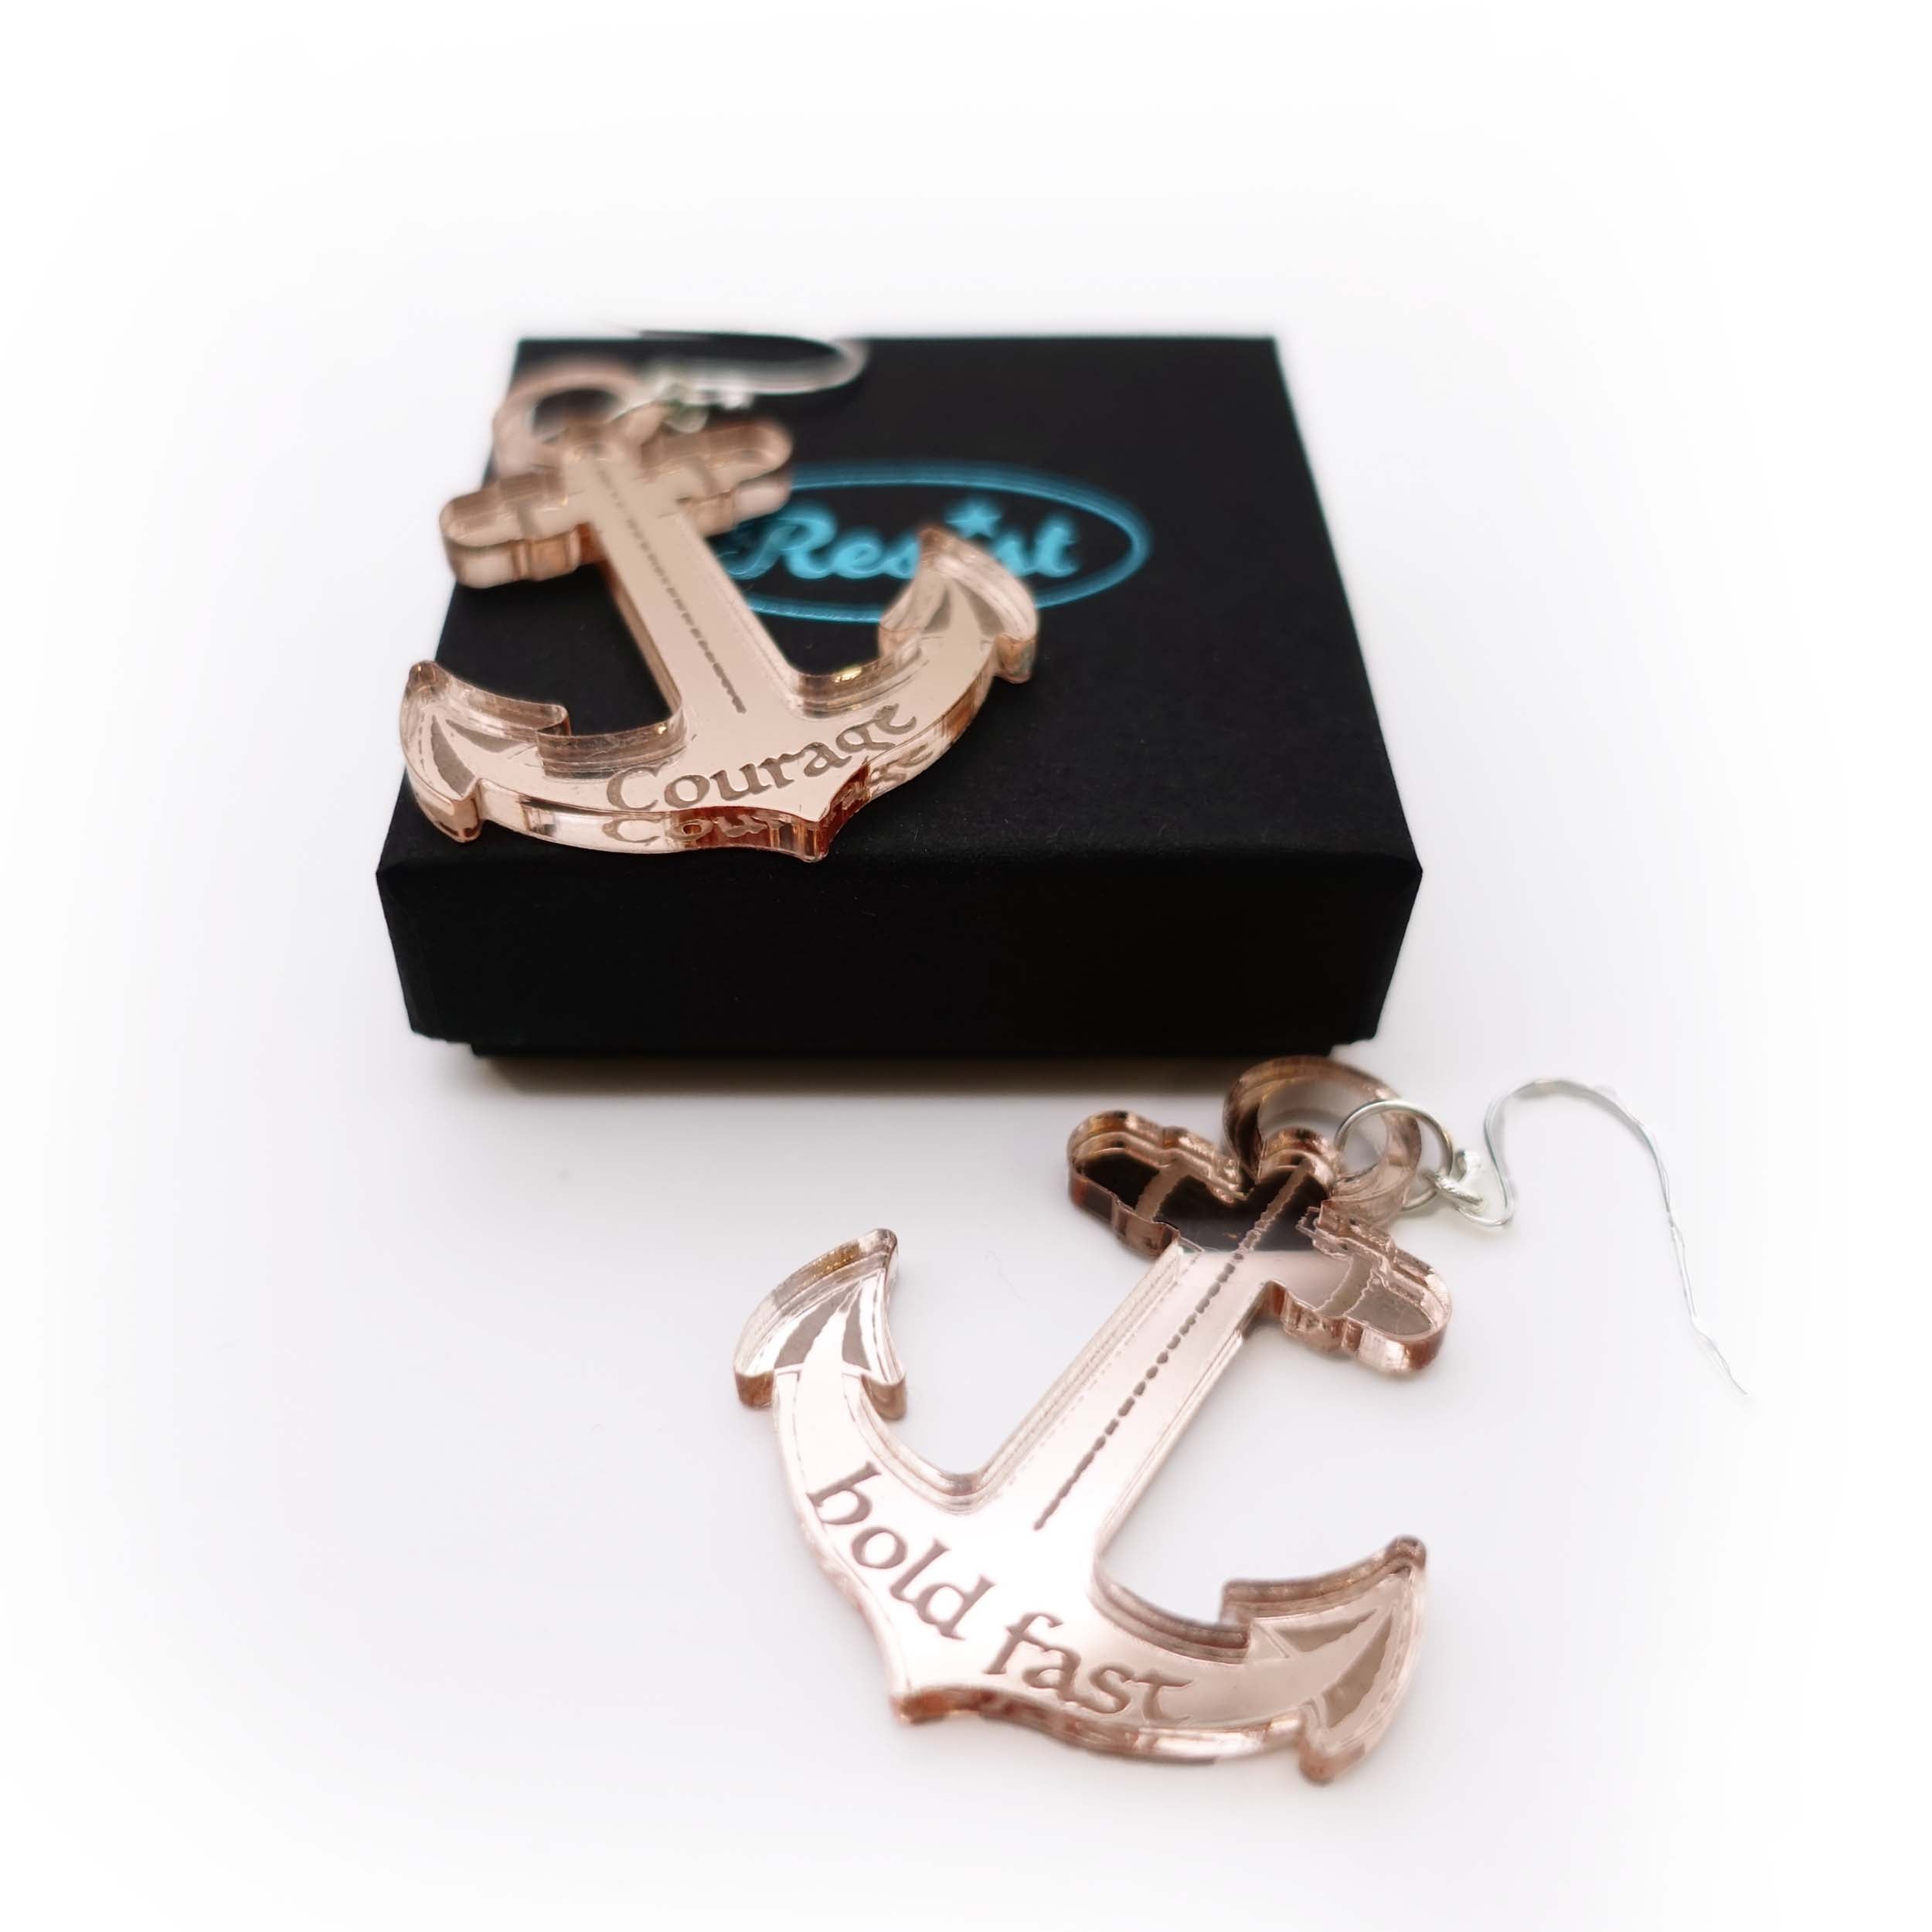 A pair of rose-gold mirror anchor earrings one etched with courage, the other etched with hold fast shown with a Wear and Resist gift box, sold with £2 going to the RNLI and another £2 going to Women for Refugee Women.